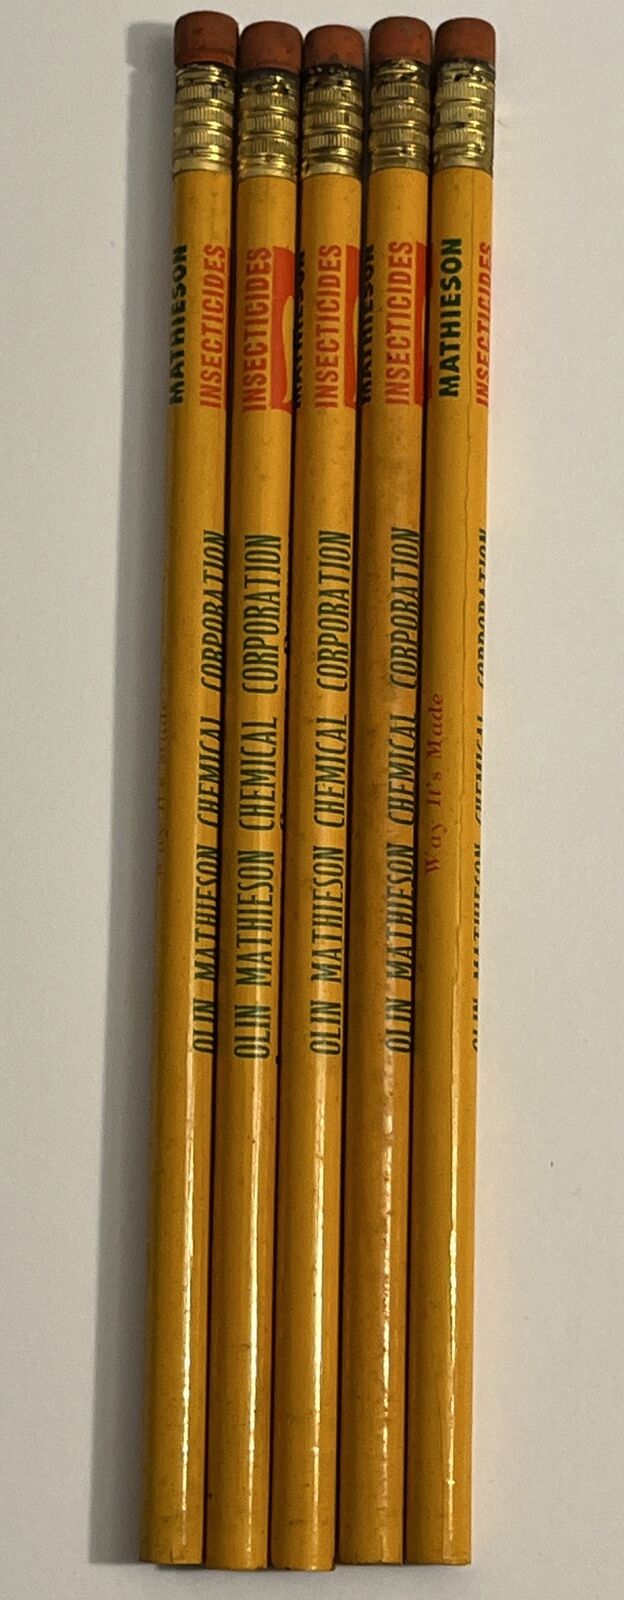 Lot of 5 Olin Mathieson Pencils Chemical Corporation Insecticides Unused